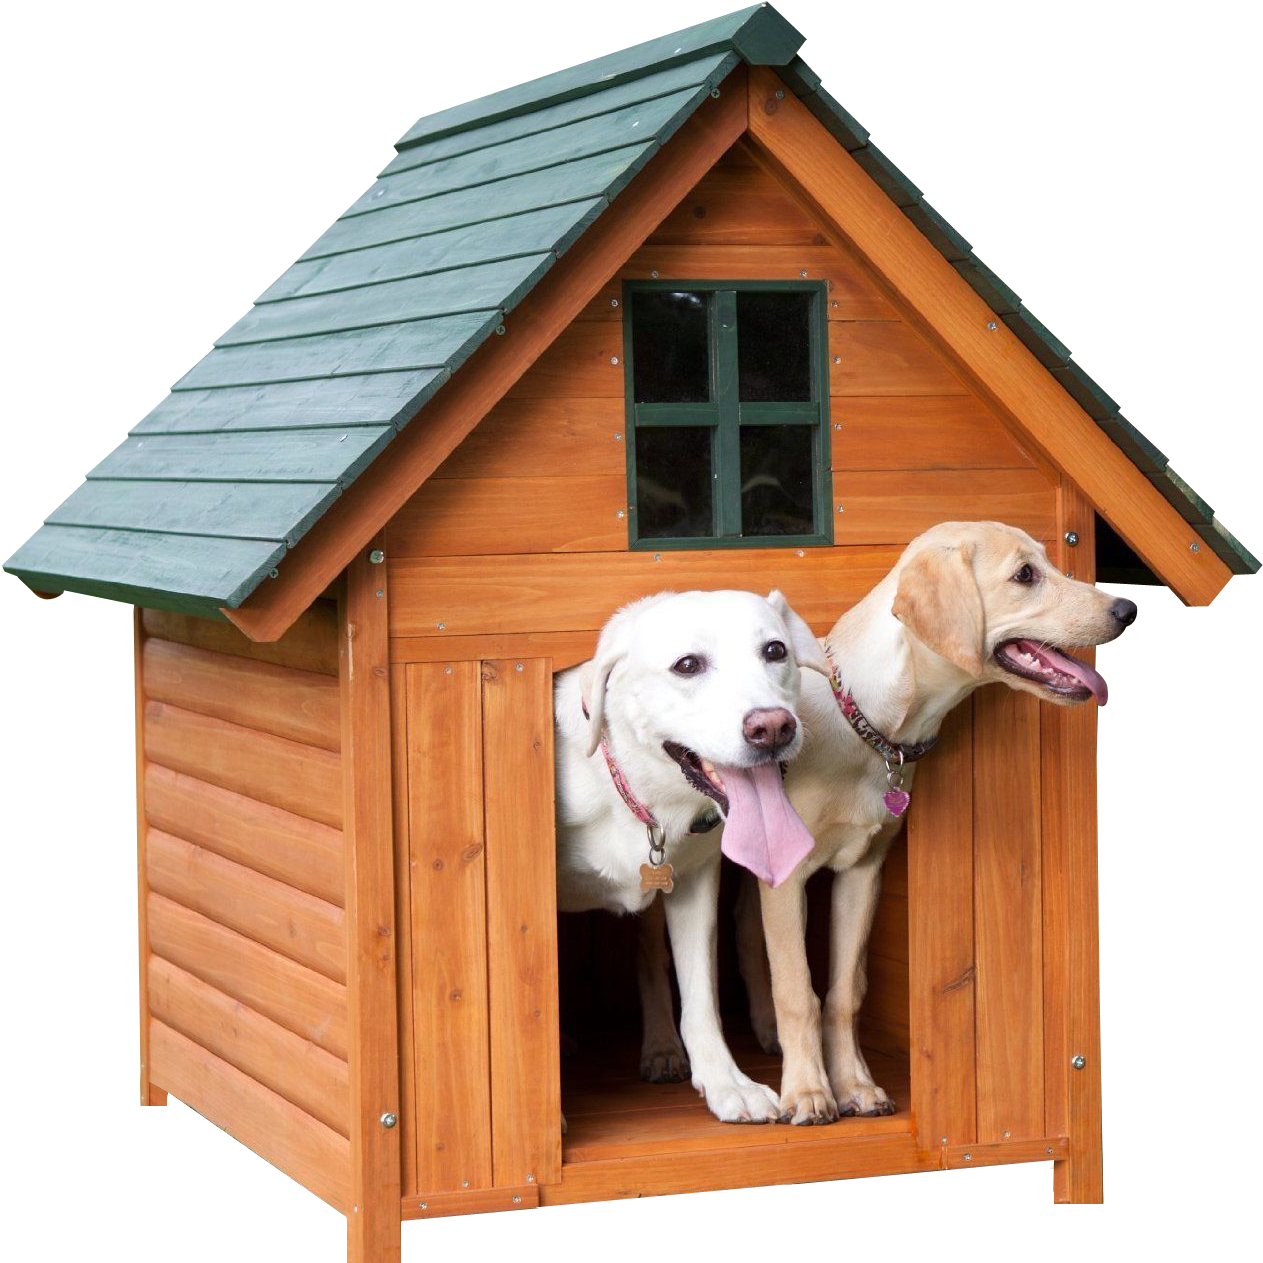 Dog House Png Image - Dog House Png (1500x1500)